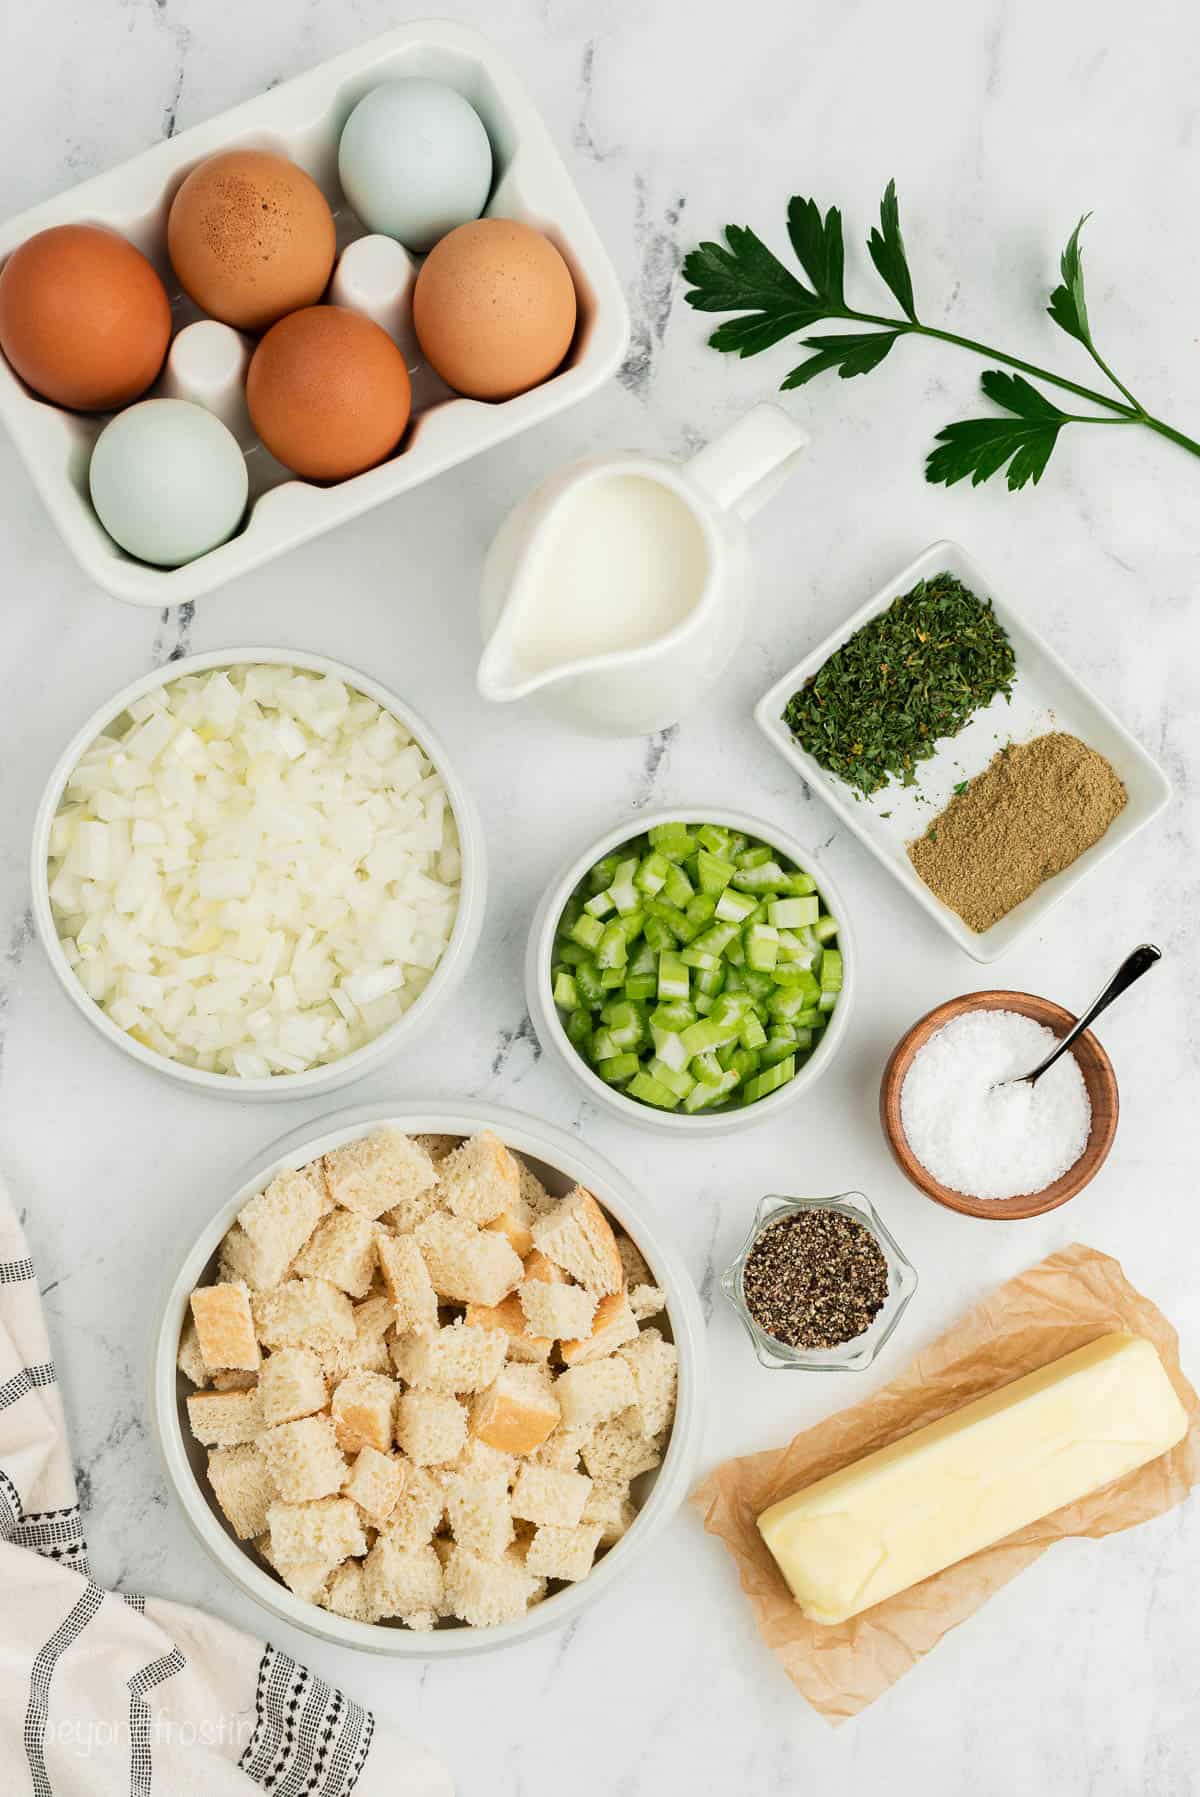 Milk, eggs, butter, salt, pepper, bread cubes and the rest of the stuffing ingredients arranged on a white marble countertop